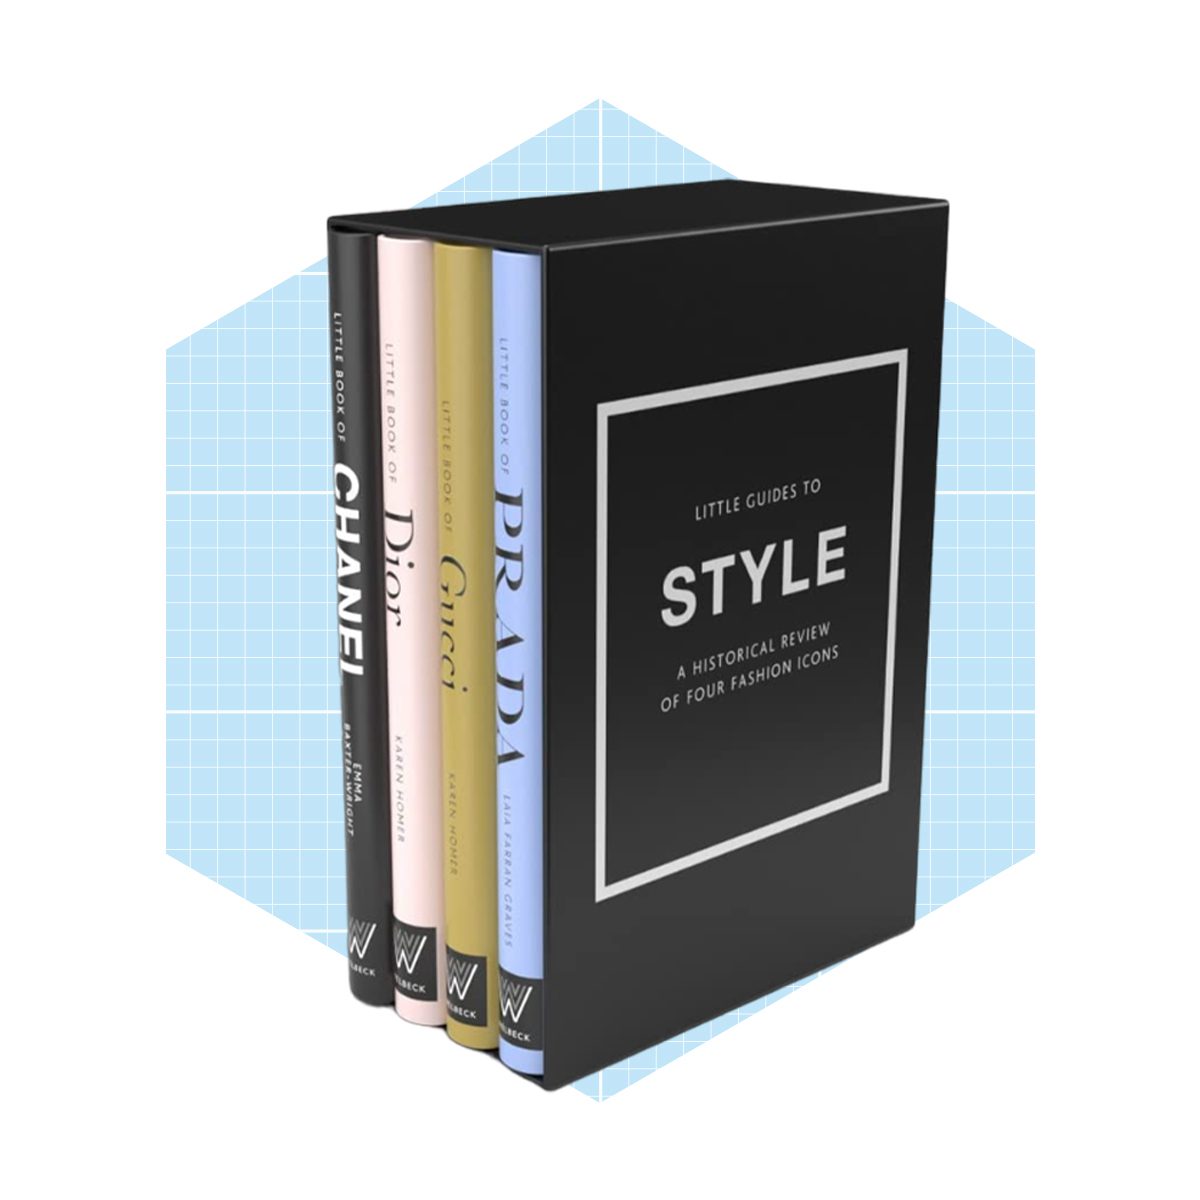 The Little Guides To Style Book Collection